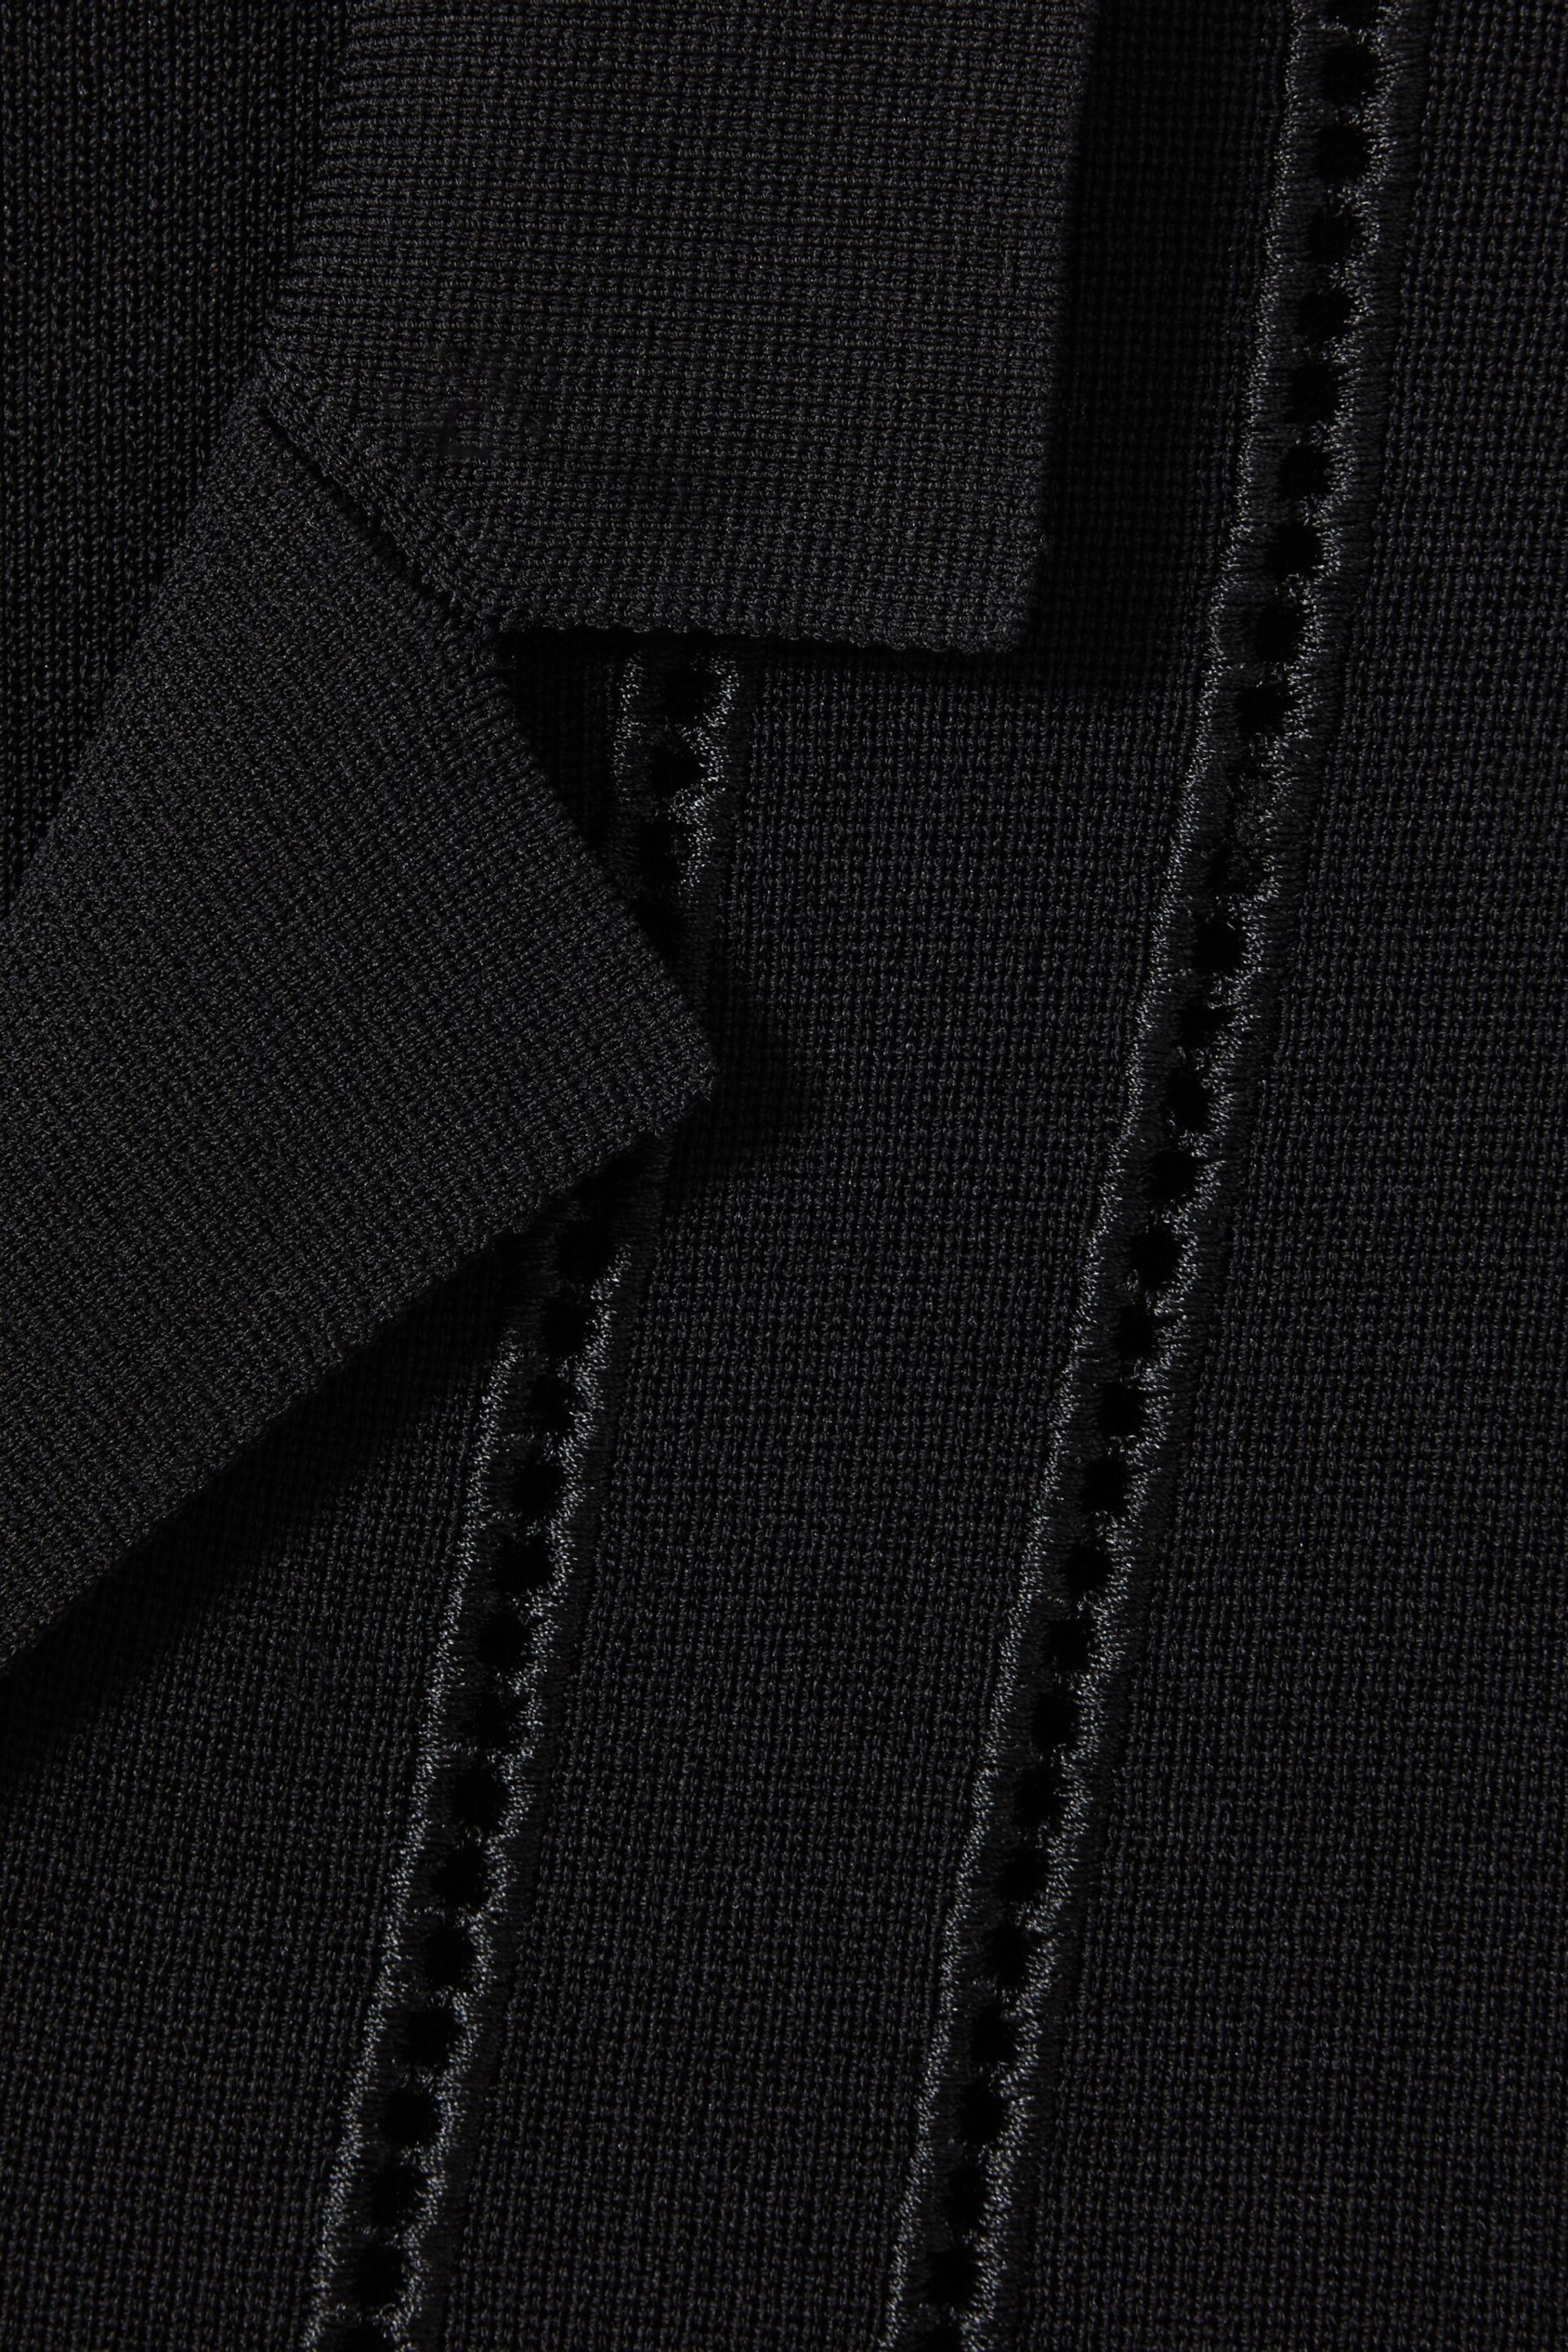 Reiss Black Heartwood Embroidered Cuban Collar Shirt - Image 6 of 6